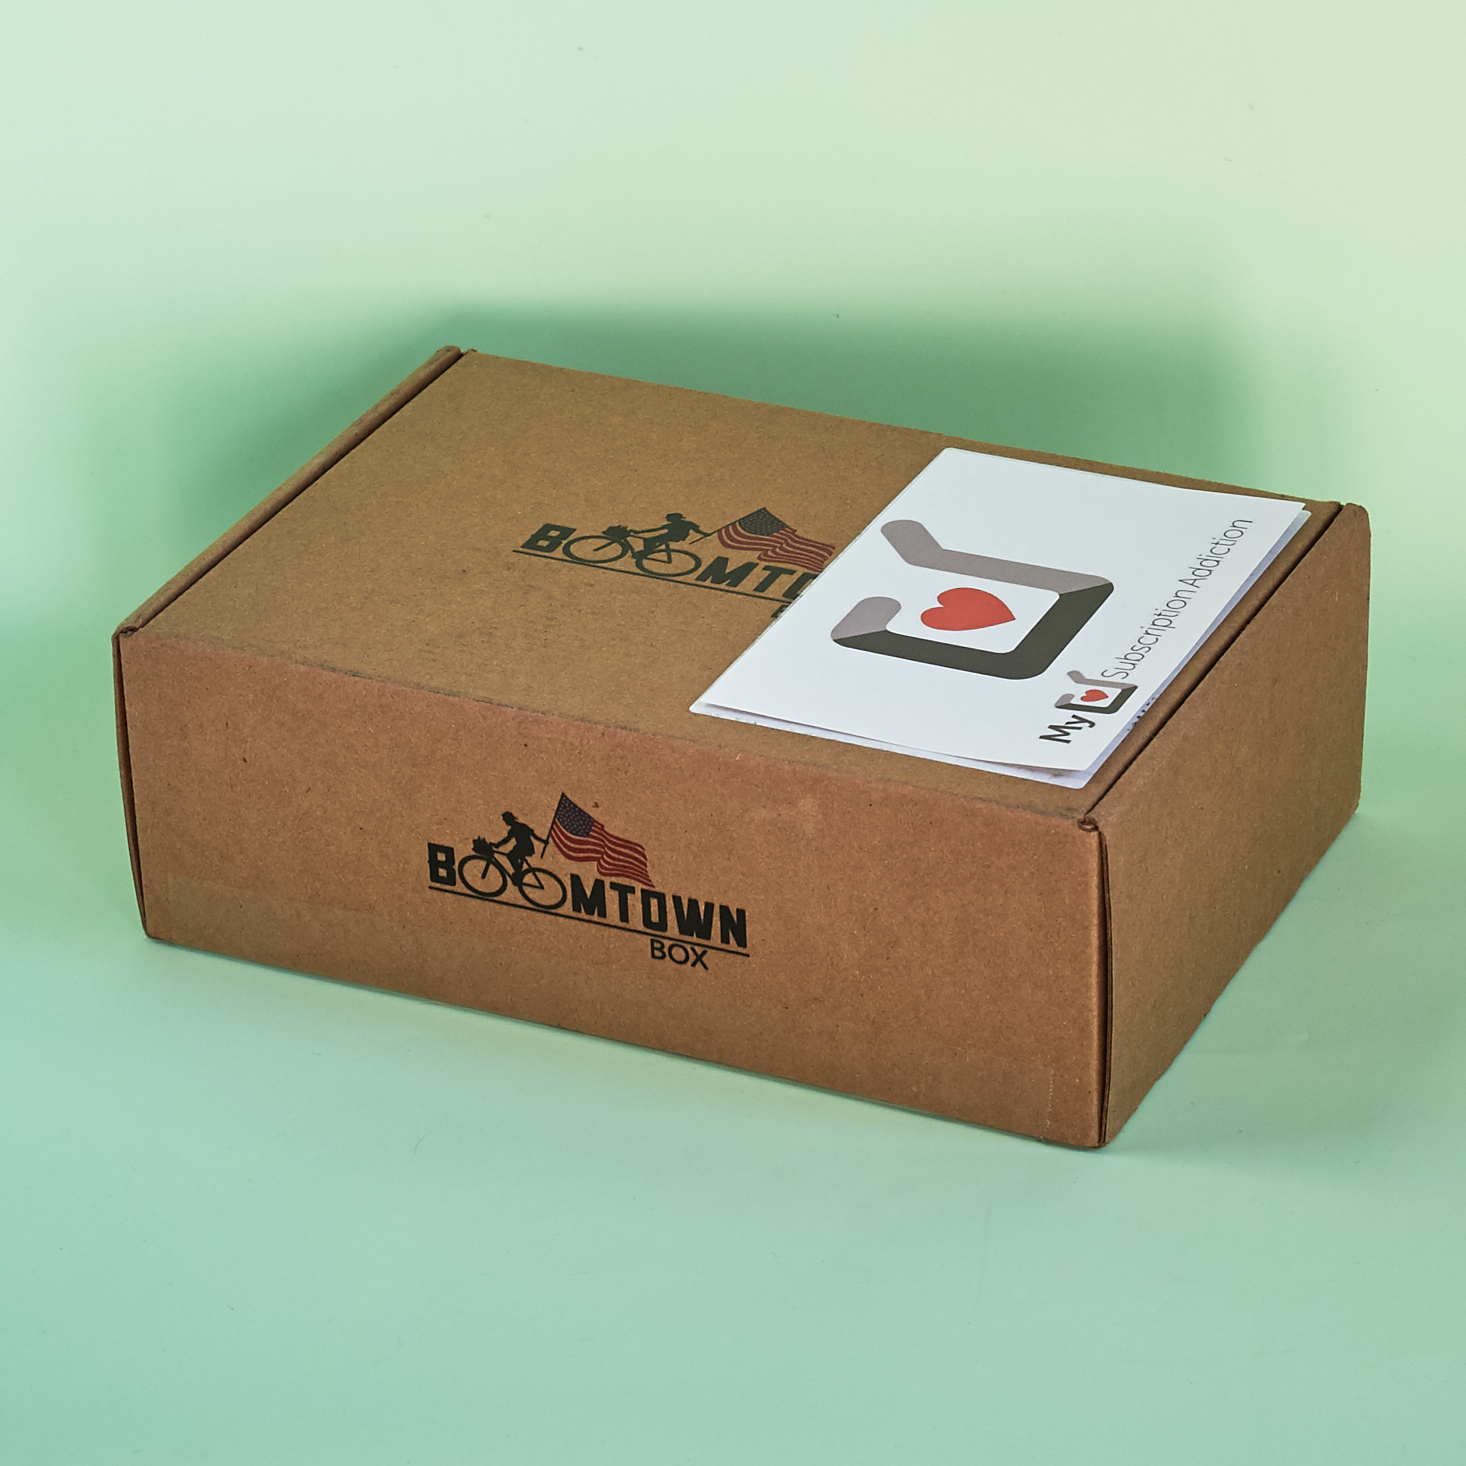 Boomtown Box Subscription Box Review – September 2016